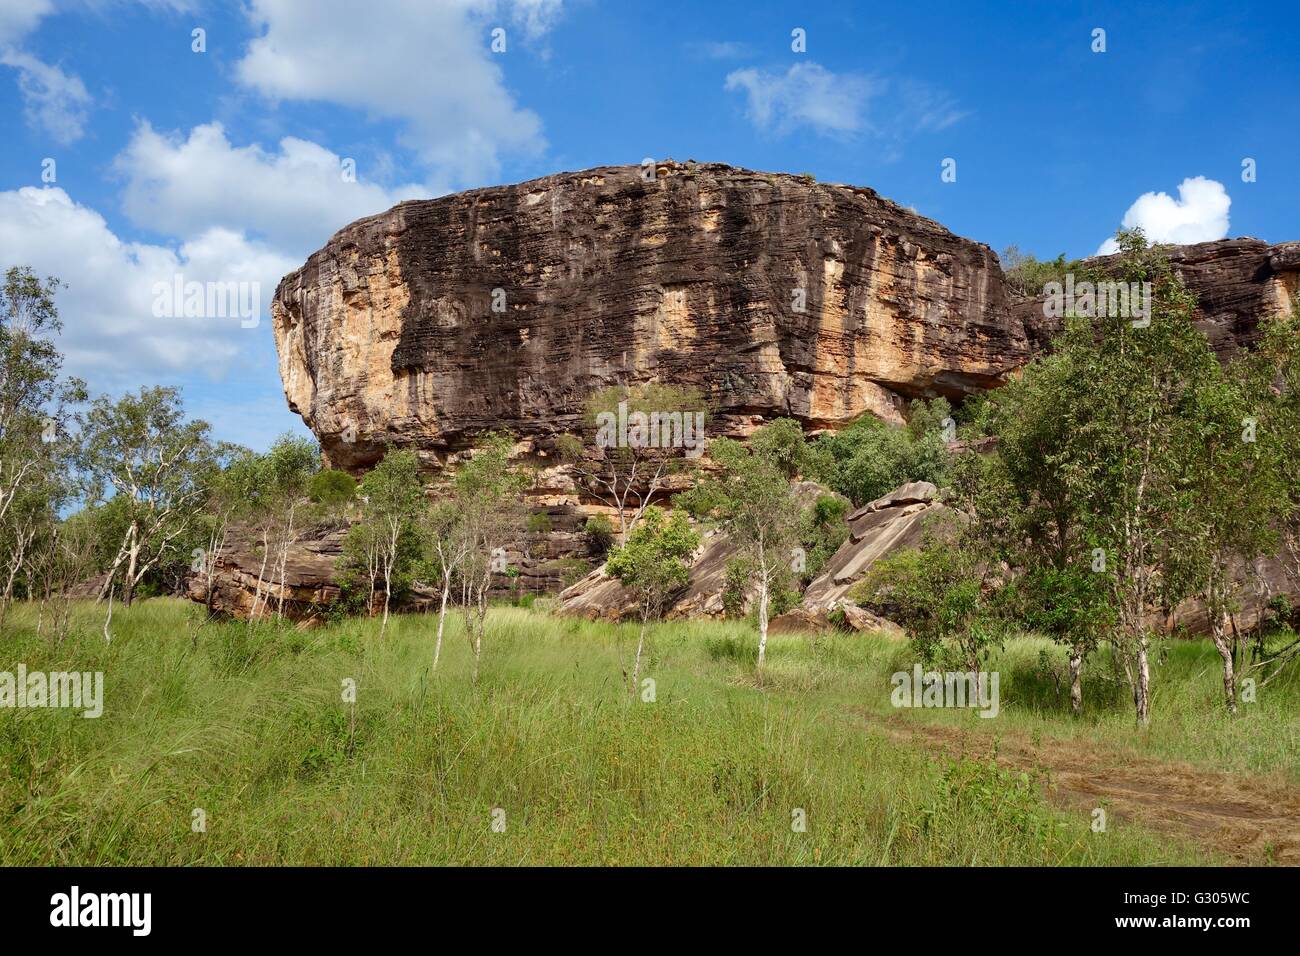 View of the rocks with cave paintings known as the 'Old Man's Hand Site' near East Alligator River, West Arnhem Land, Australia Stock Photo